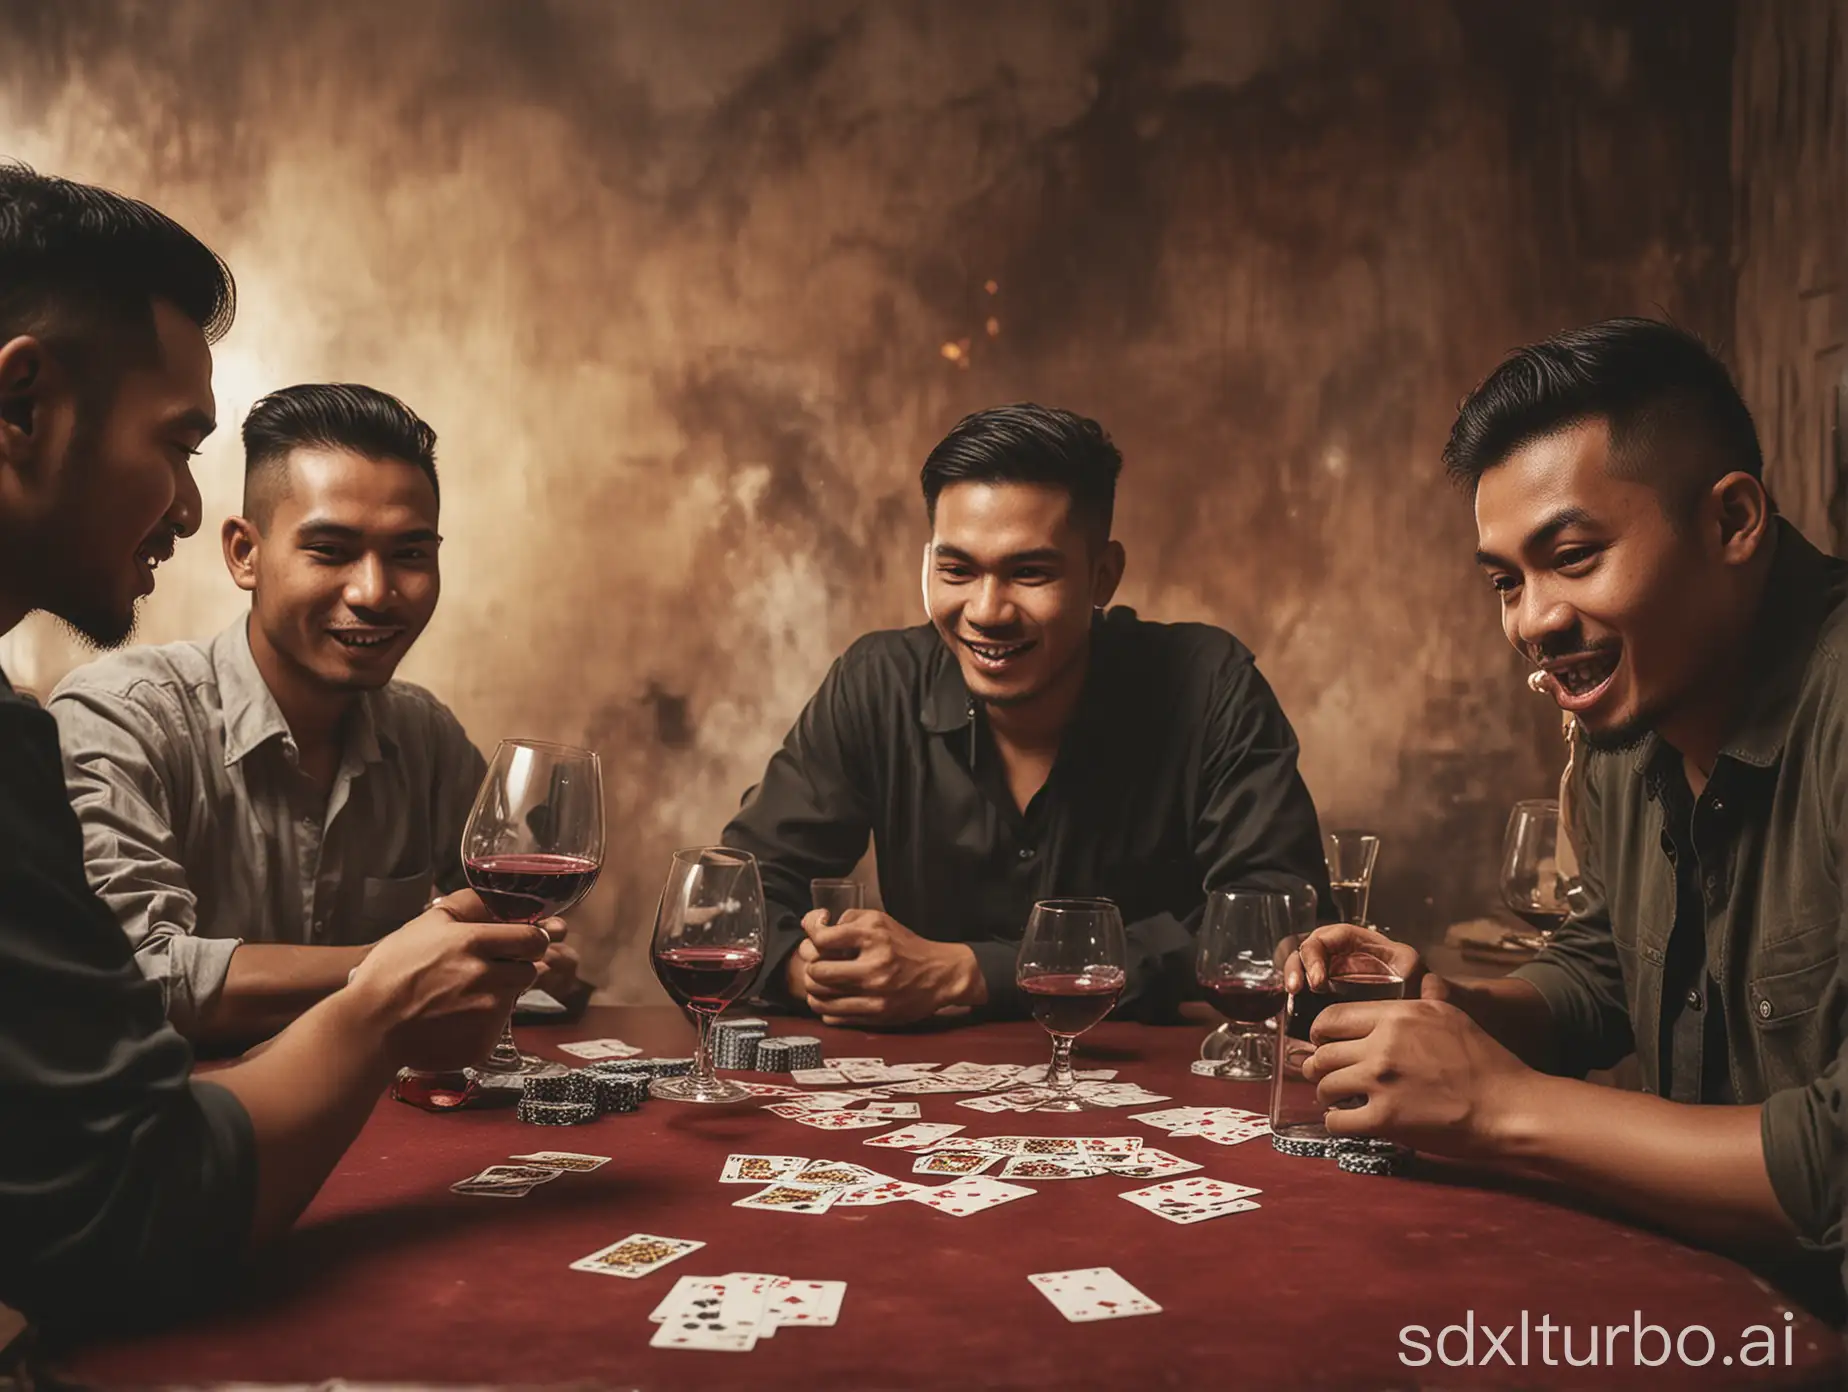 Group-of-Malay-Men-Playing-Poker-and-Drinking-Wine-in-Hell